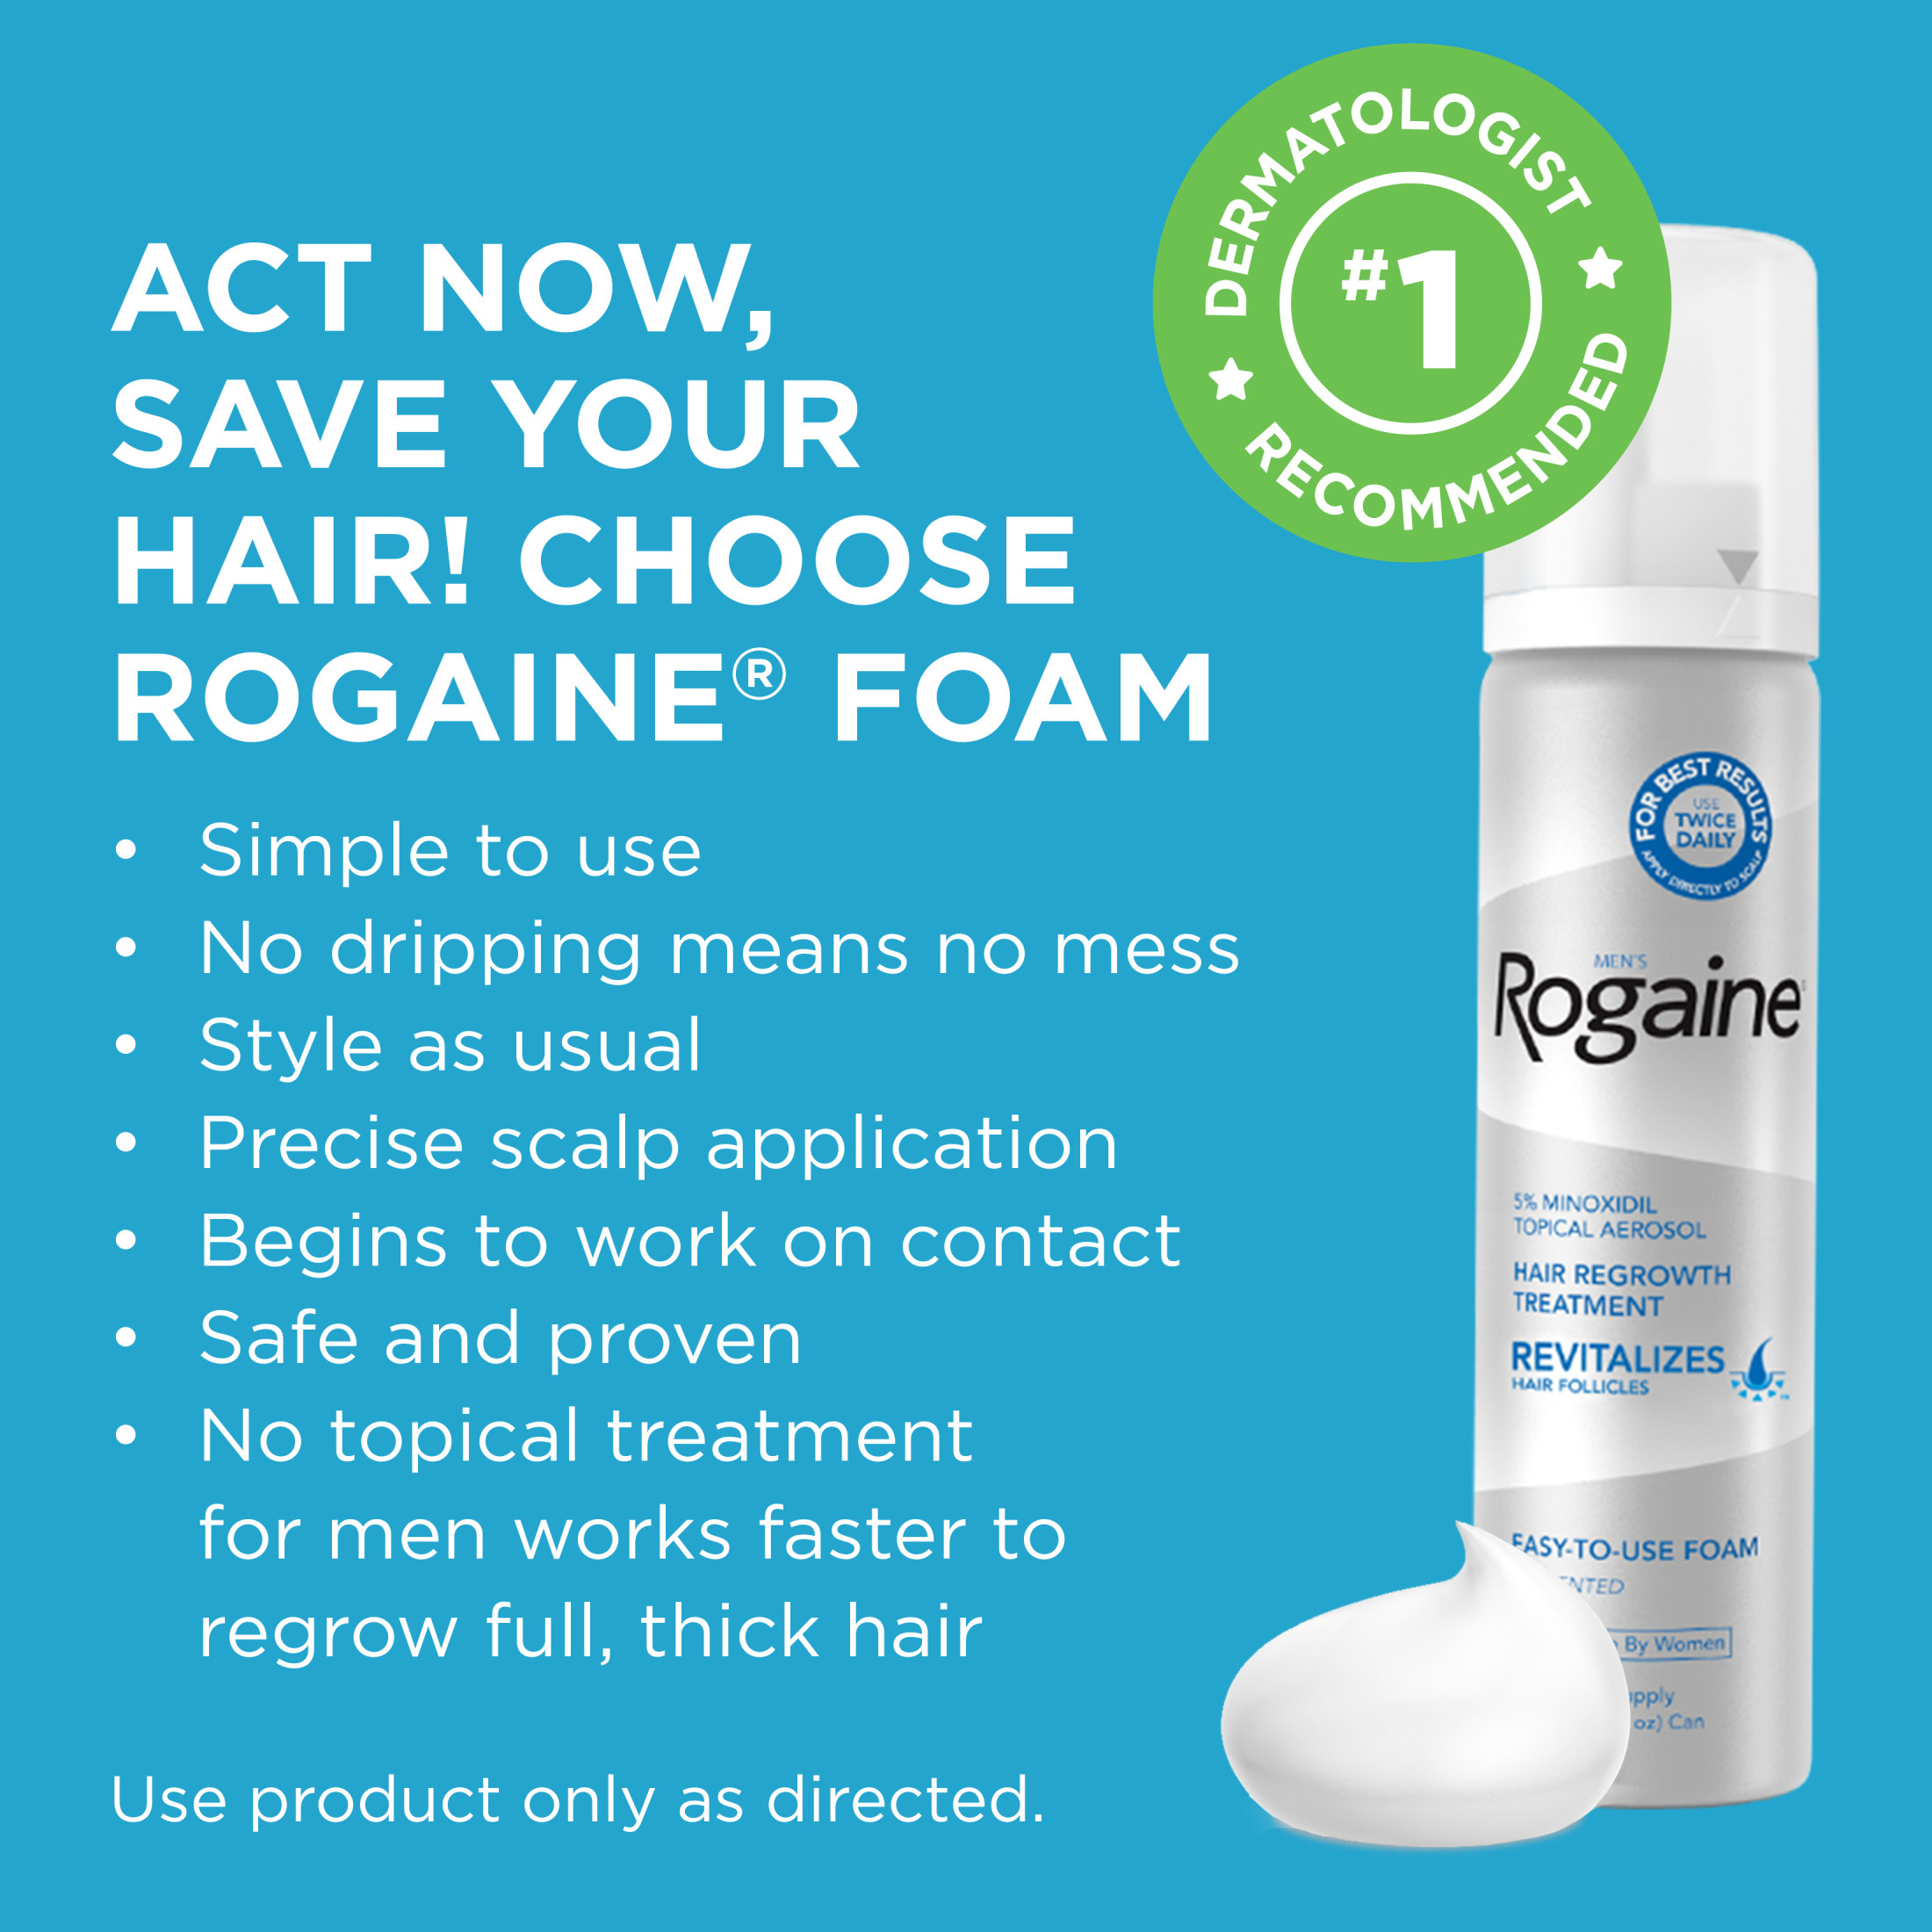 Men's Rogaine 5% Minoxidil Foam for Hair Regrowth, 3-month Supply - image 3 of 19